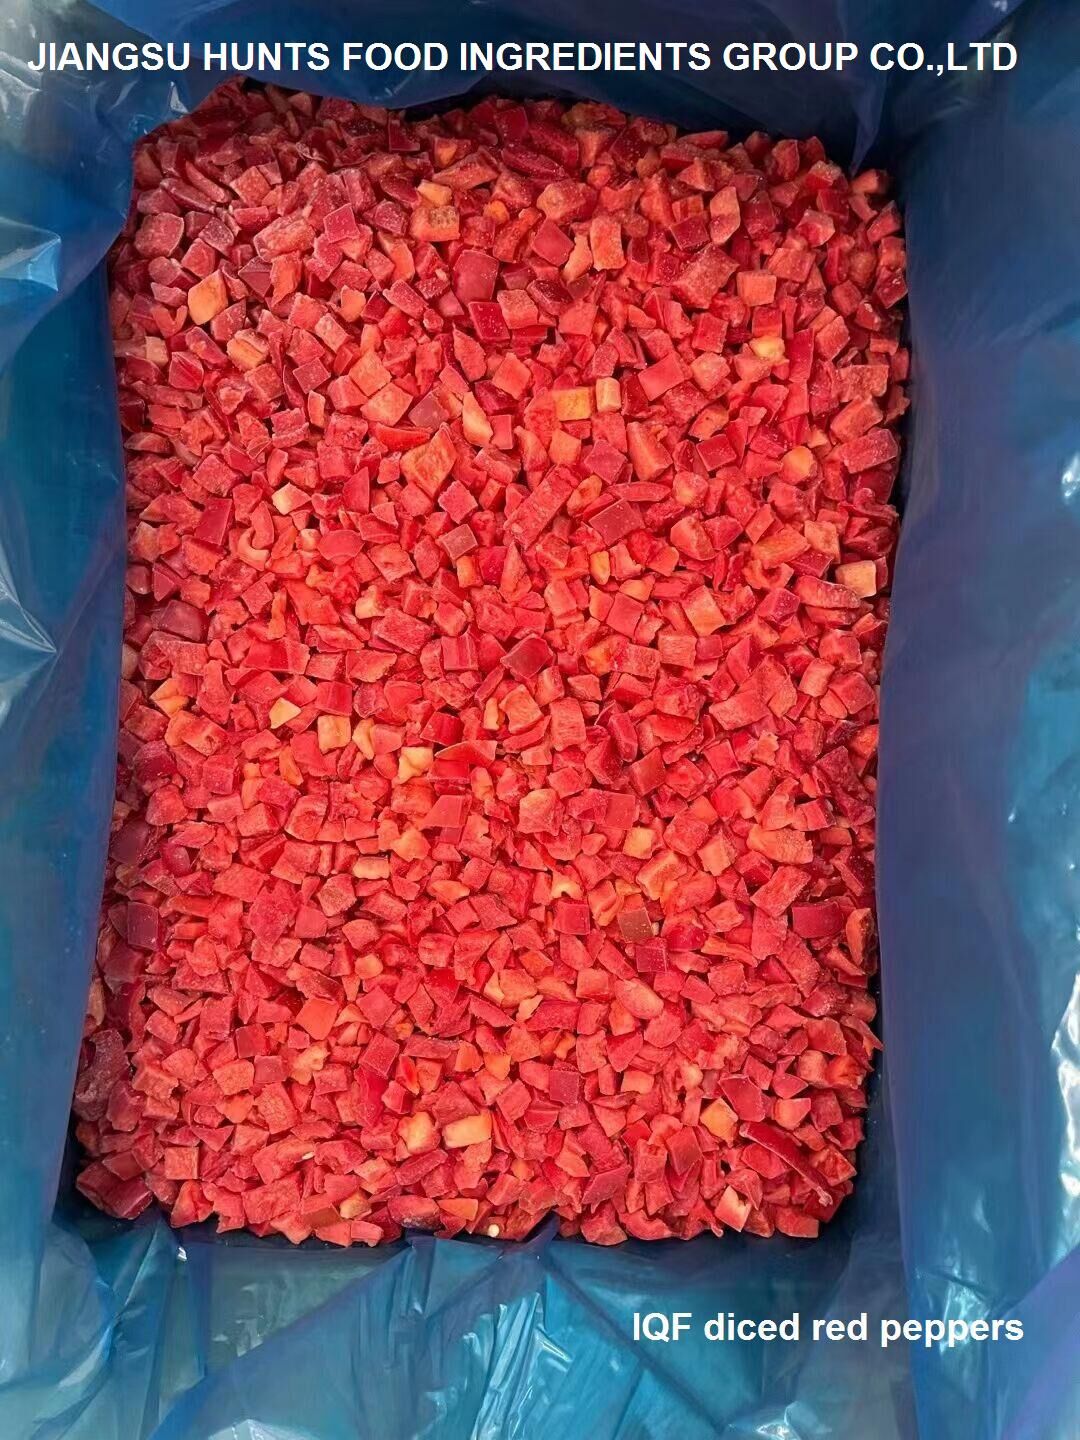 IQF diced red peppers